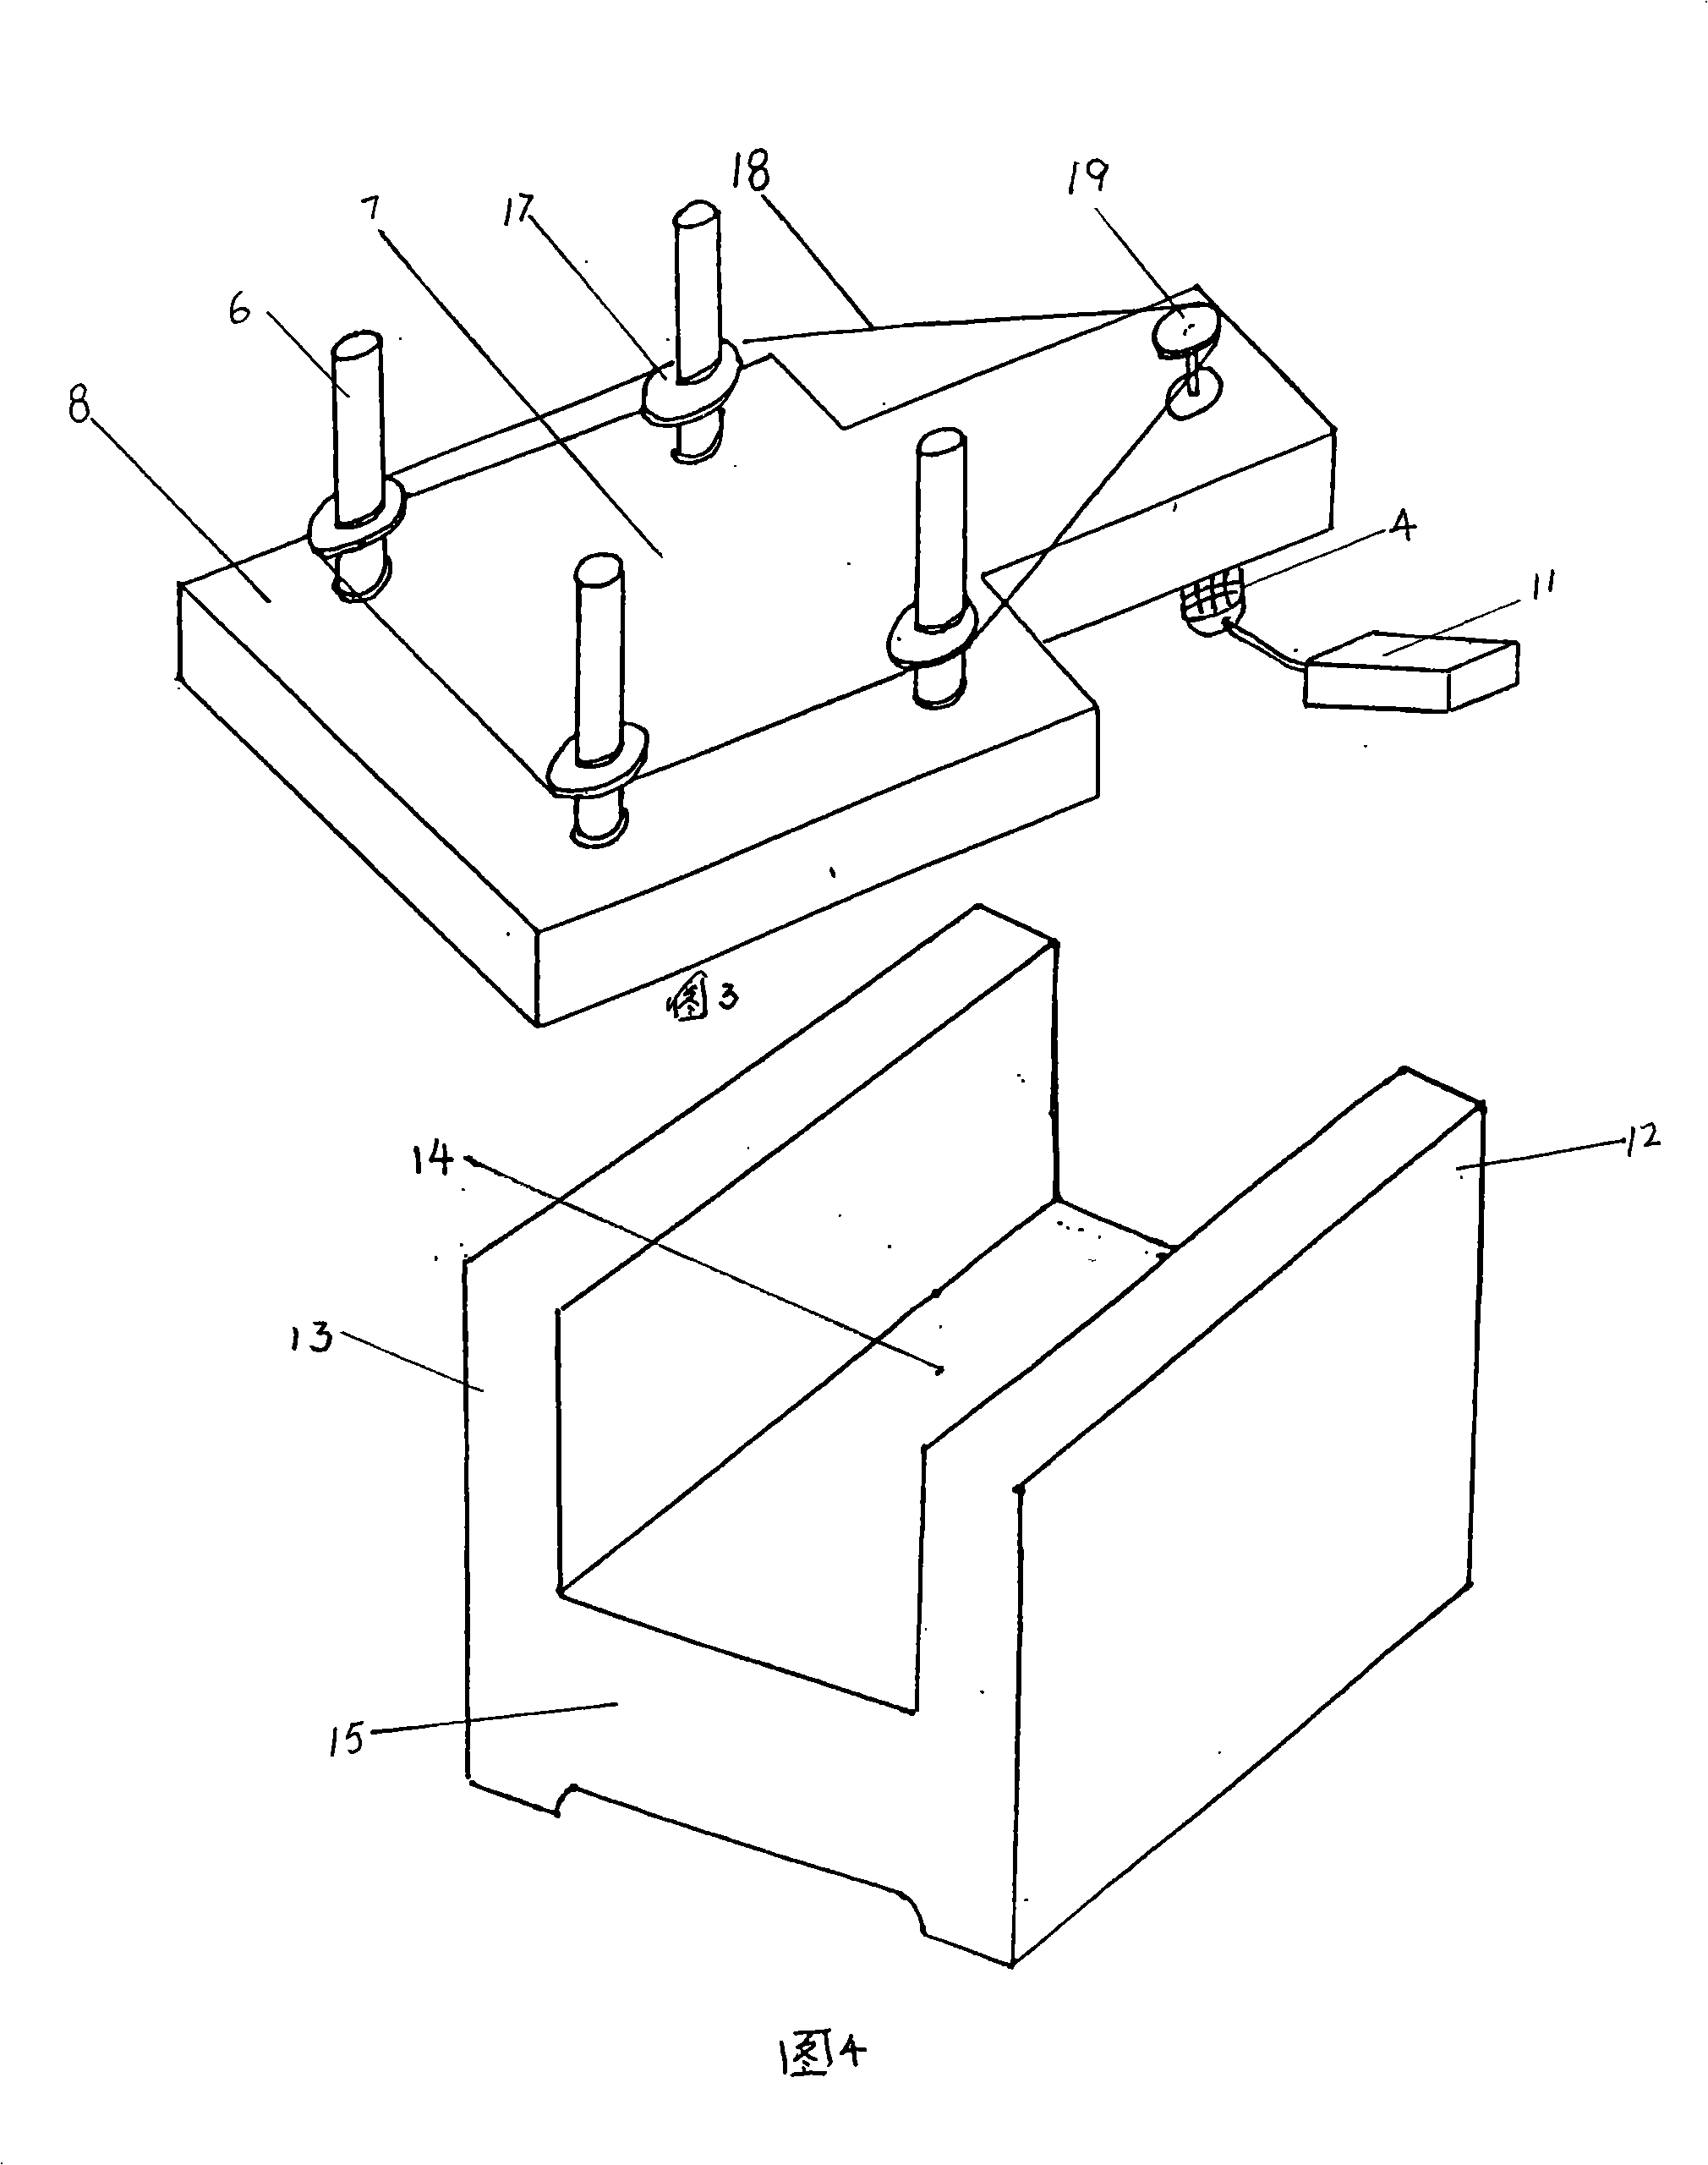 Equipment for rotating permanent magnetism